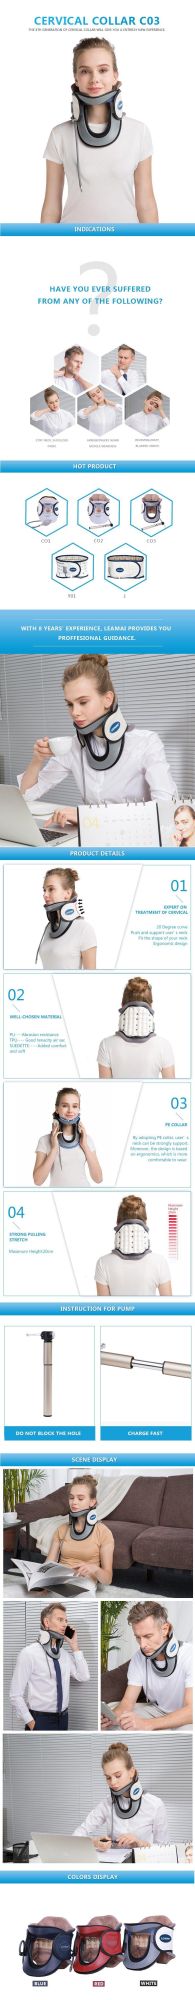 Ergonomic Neck Cervical Traction Care Device Support